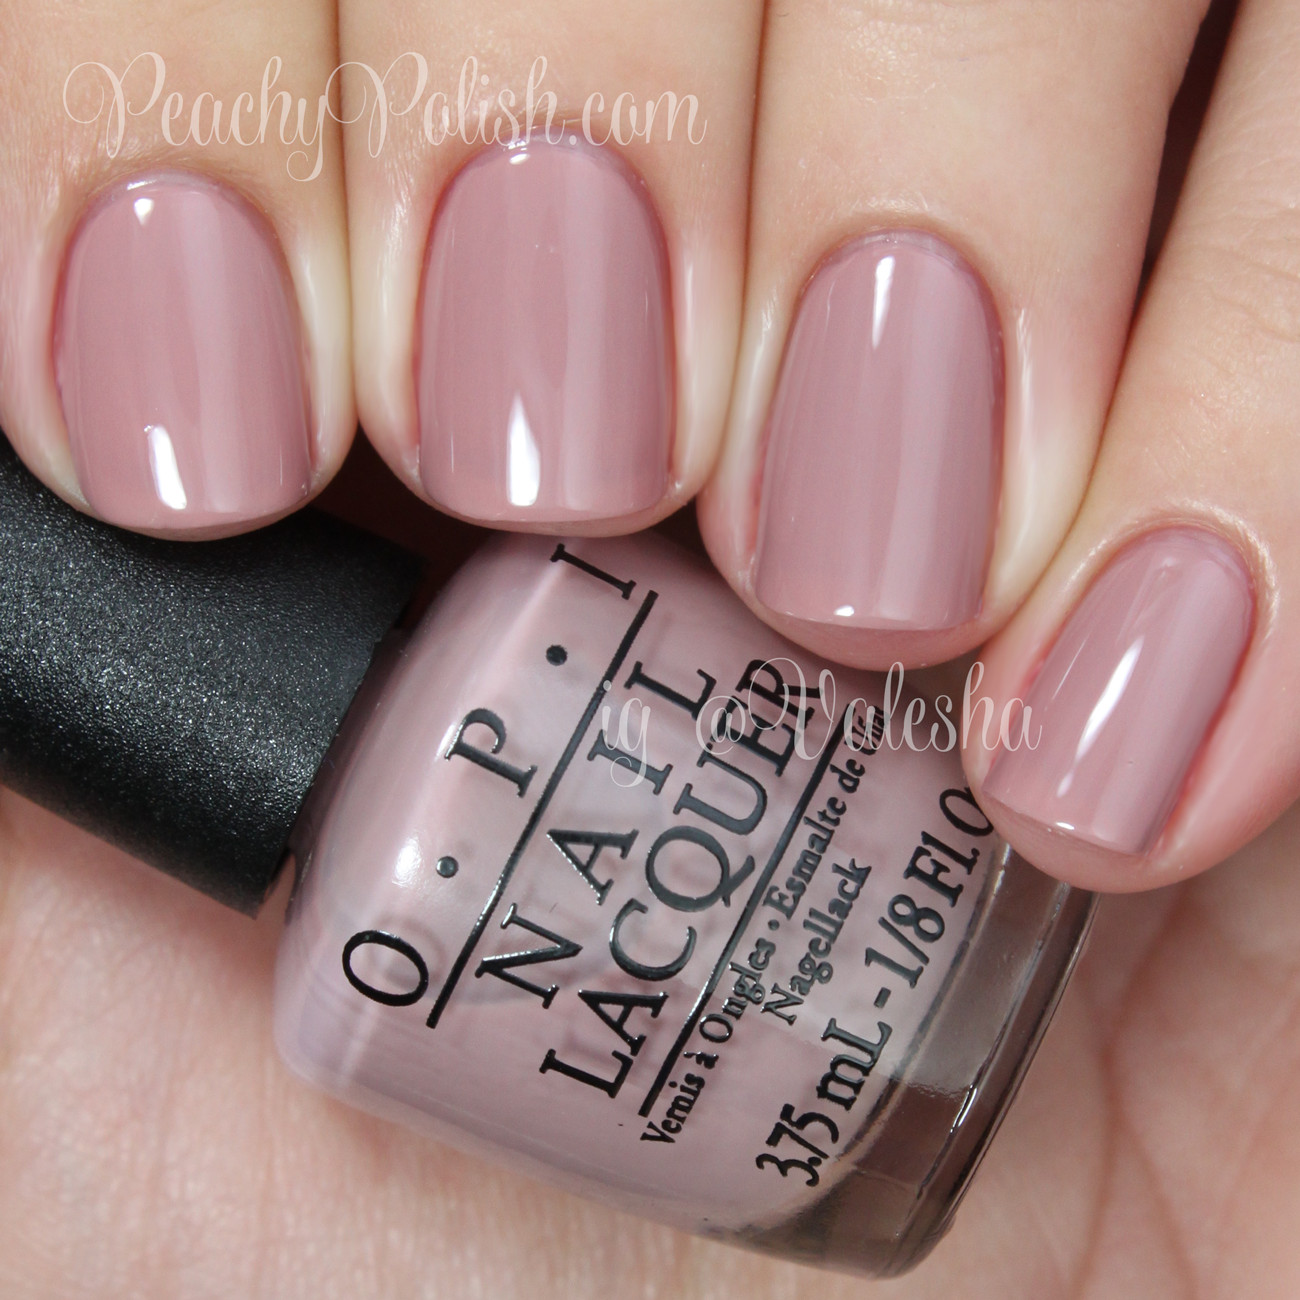 Opi Neutral Nail Colors
 OPI Tickle My France y Peachy Polish